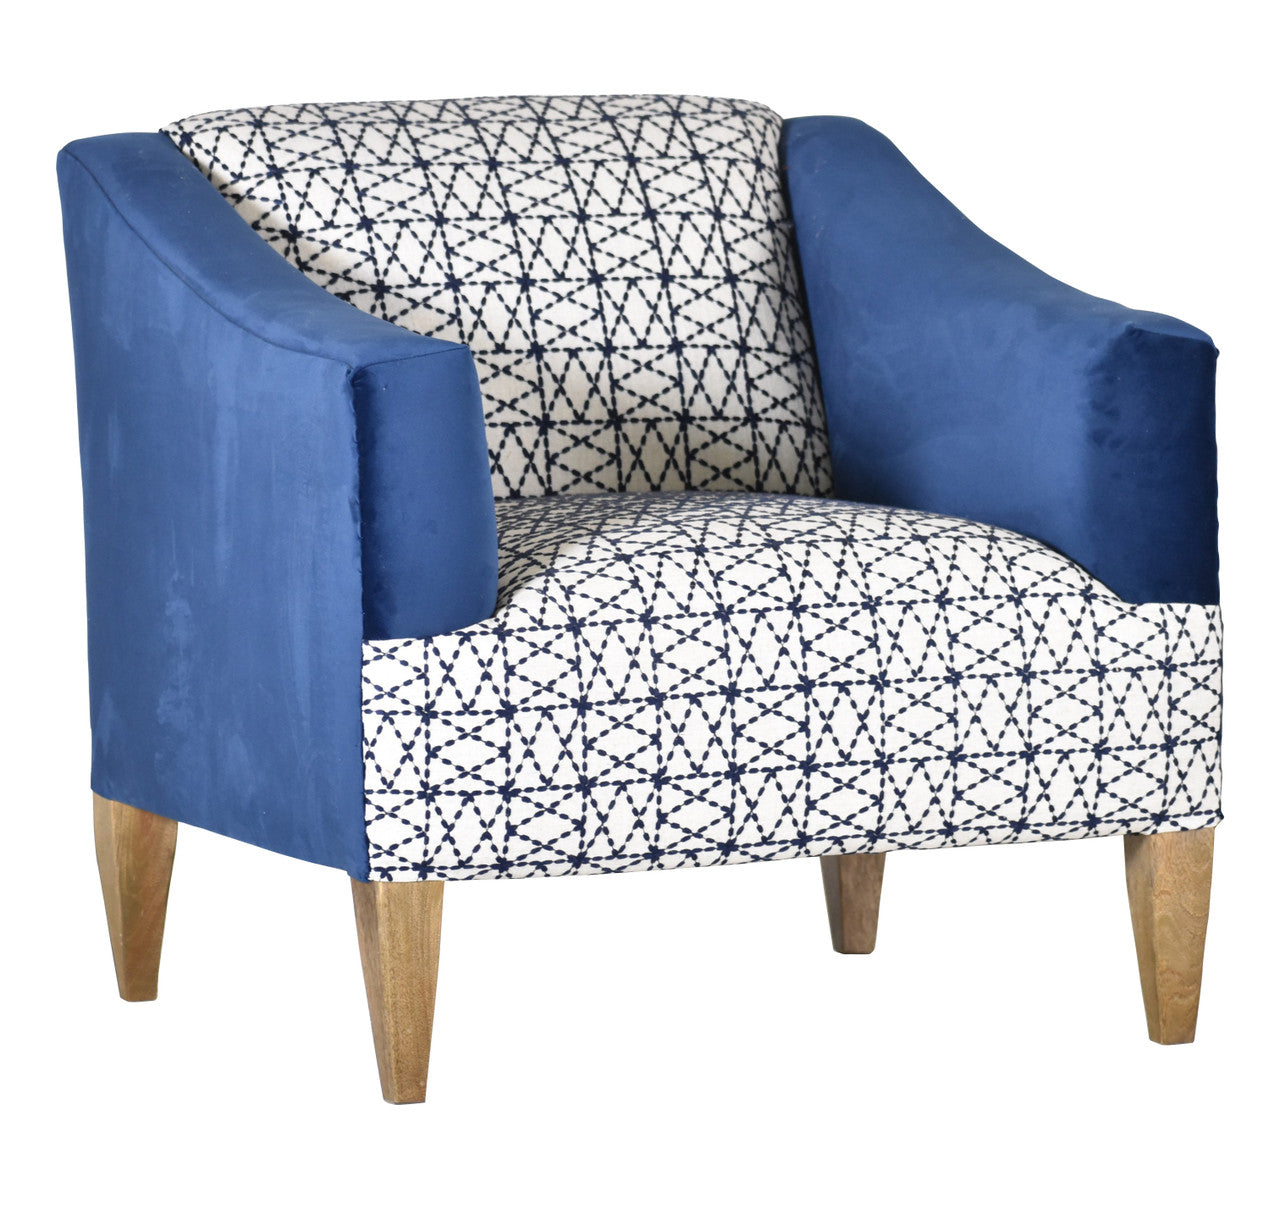 AFD Home Daxton Blue and White Geometric Chair 12020883